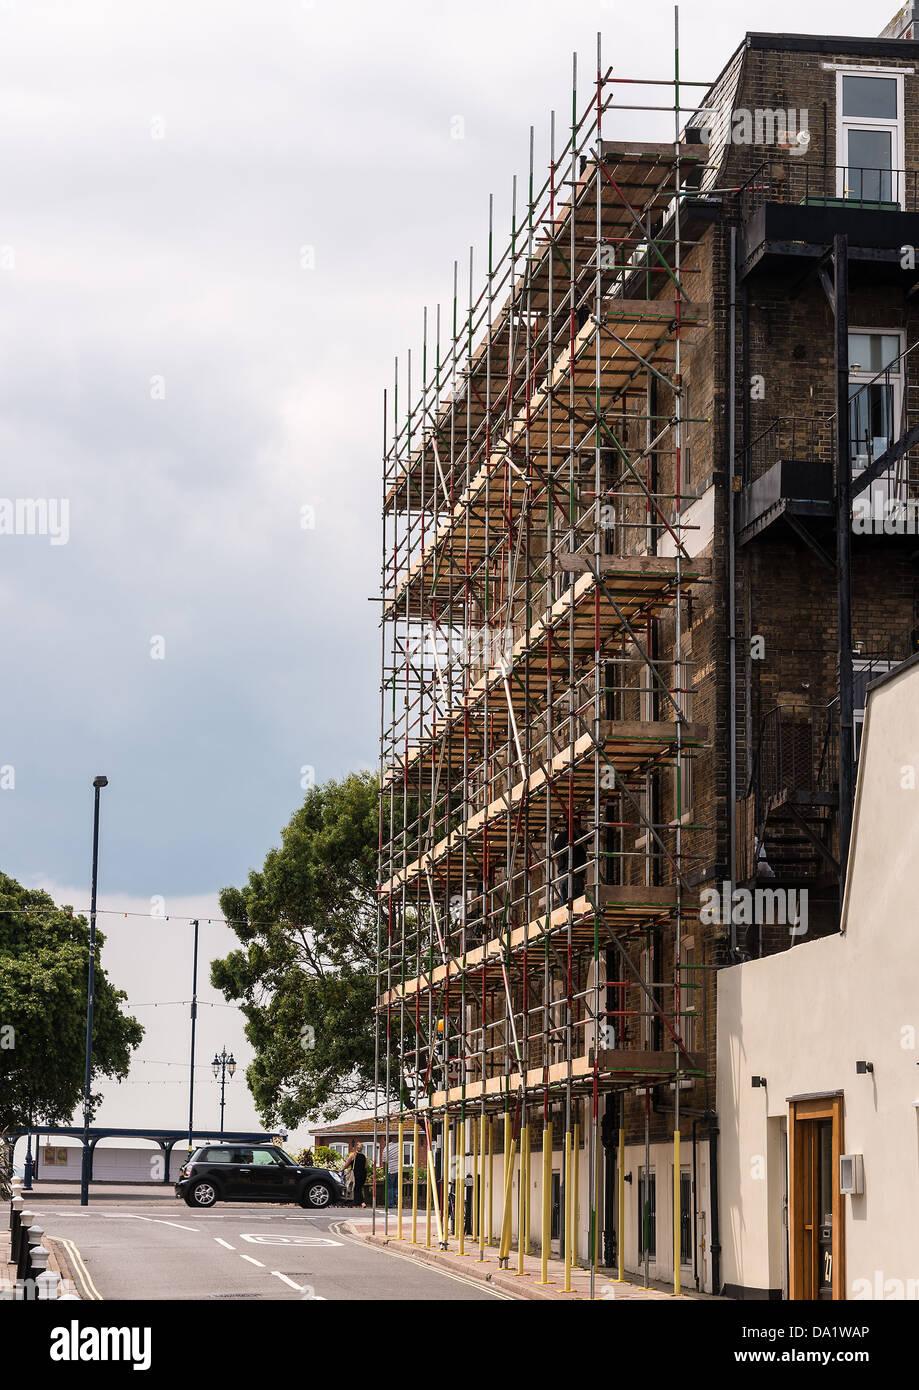 Tall Scaffolding on building Stock Photo